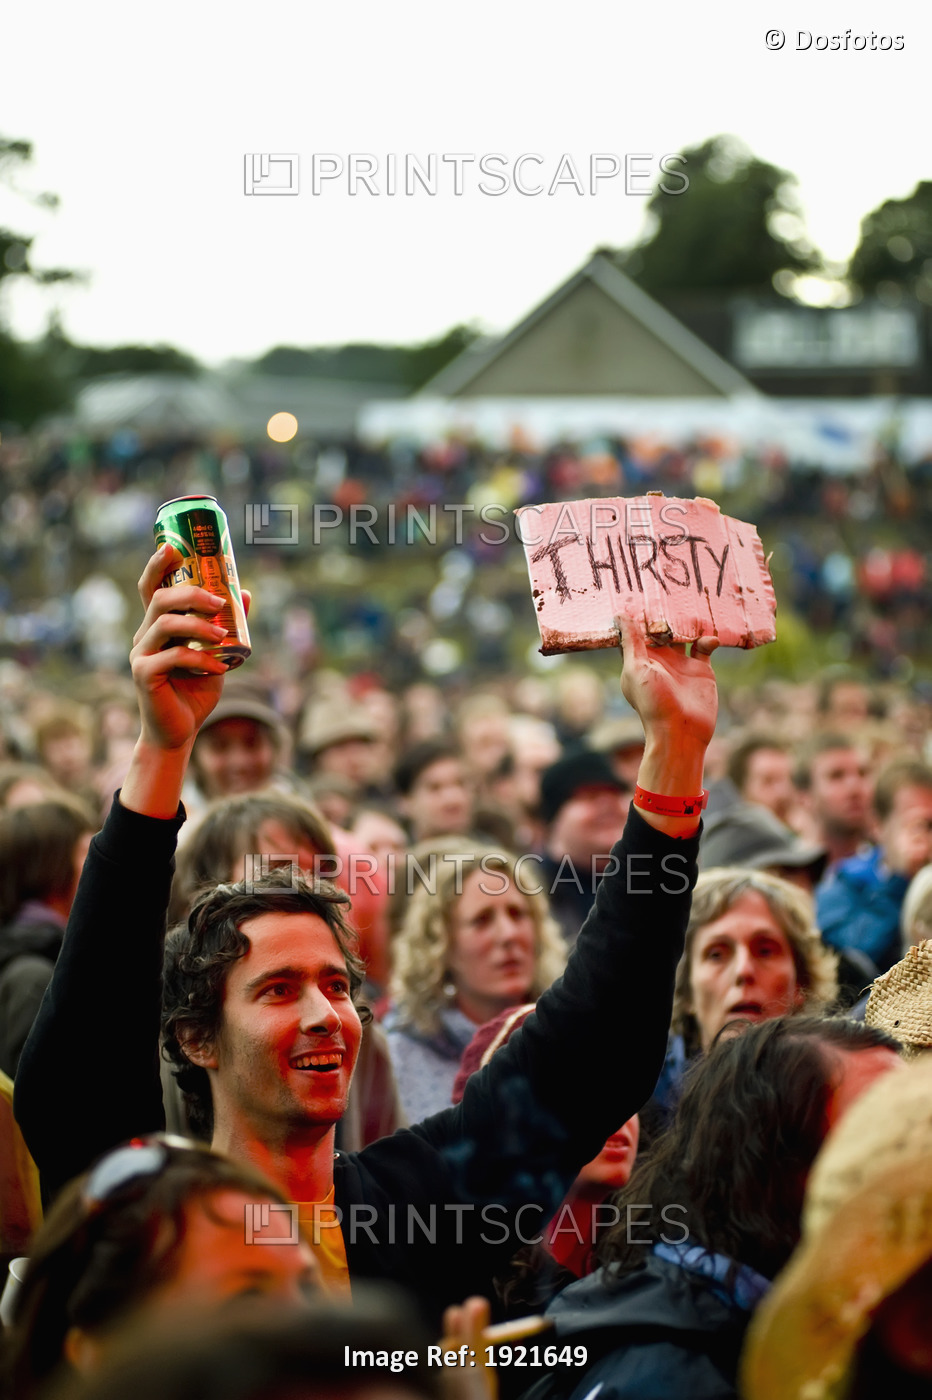 Fan with beer at Green Man Festival, Glanusk Park, Brecon Beacons, Wales, UK